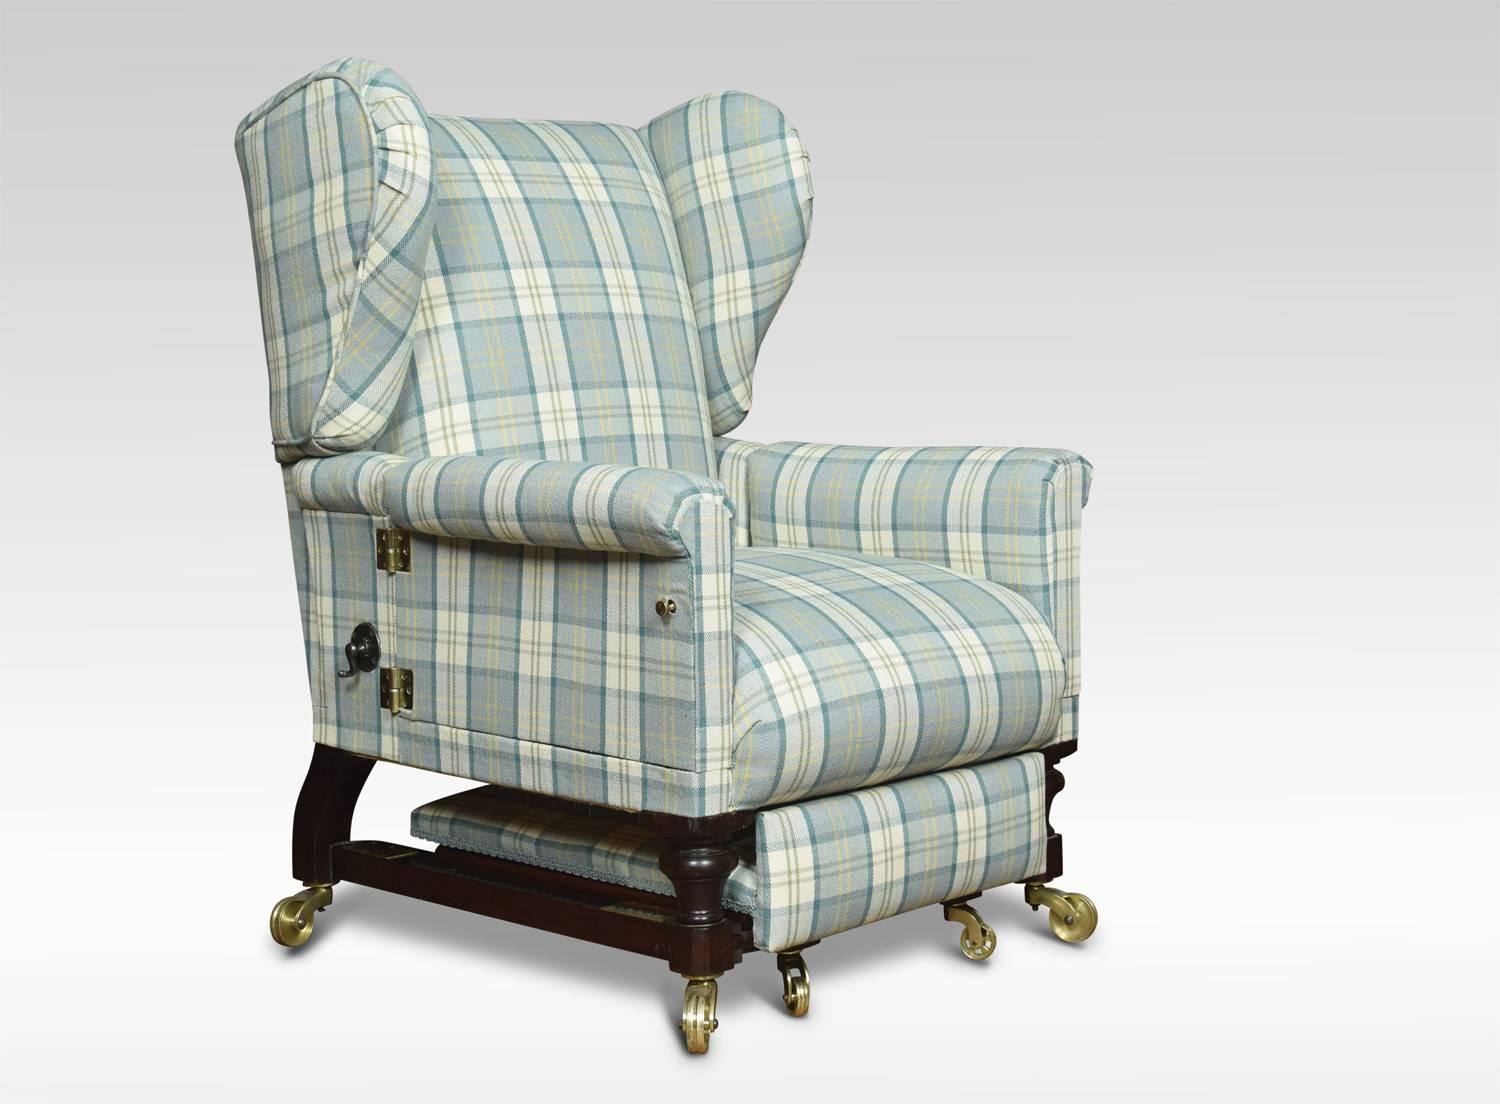 19th century wing armchair, the shaped reclining back above large movable arm rests, leading down to fully adjustable stool, Upholstered in tartan fabric. Raised on four tuned legs terminating in large brass castors.
Dimensions:
Height 46 inches